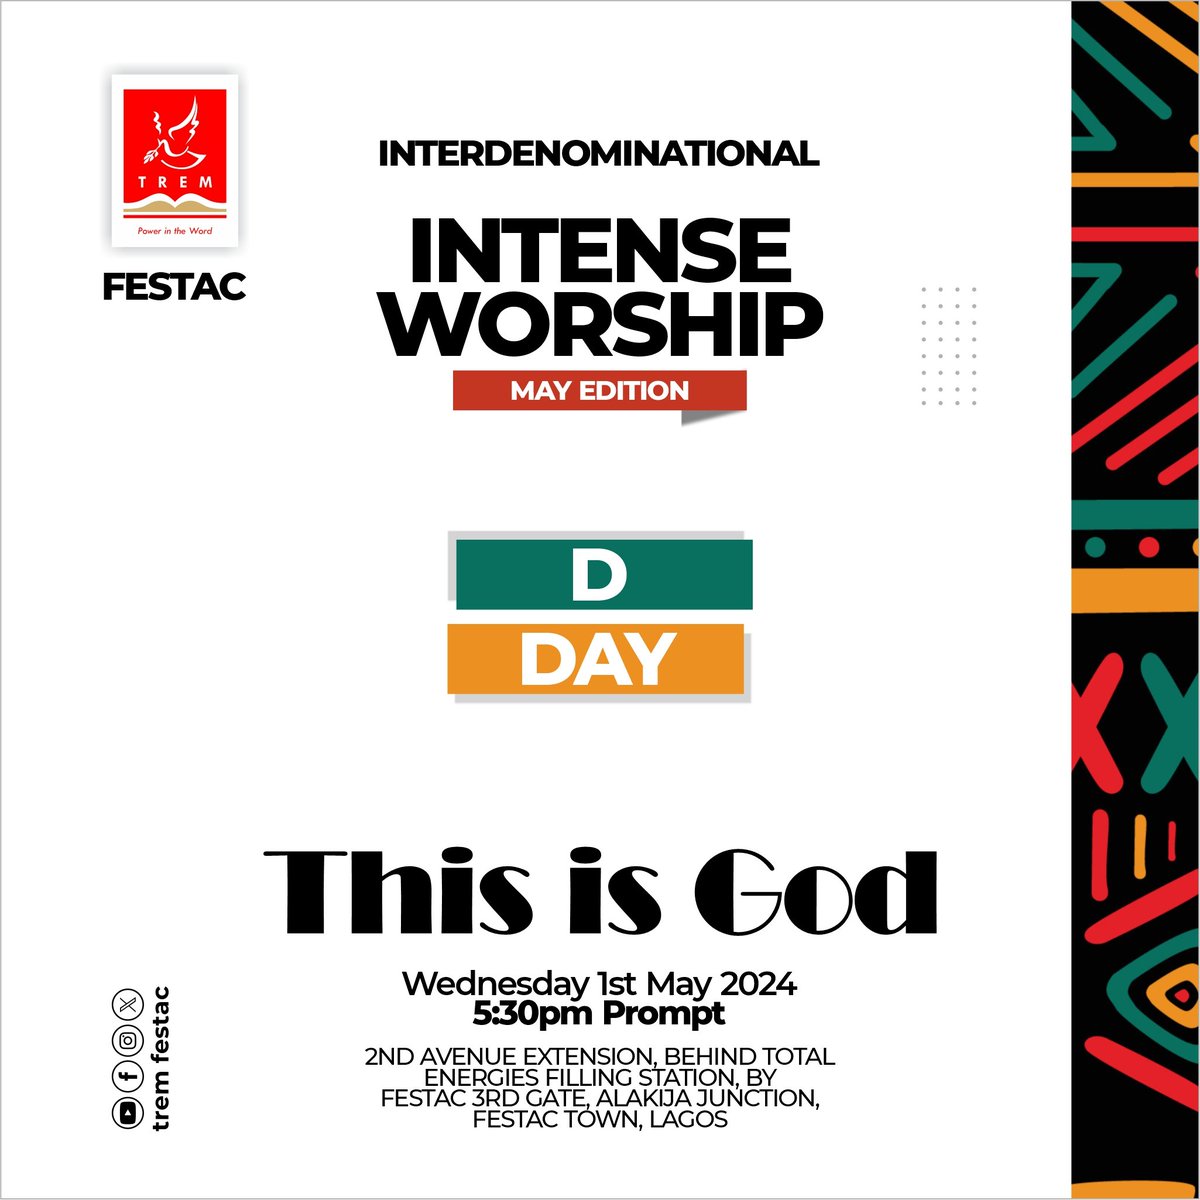 Psalms 29:2 ~ Give unto the Lord the glory due to His name; Worship the Lord in the beauty of holiness. 

@festaconline @SpiricocoNg

#TREM #TREMFESTAC #Intense #Worship #ThisIsGod #IntenseWorship